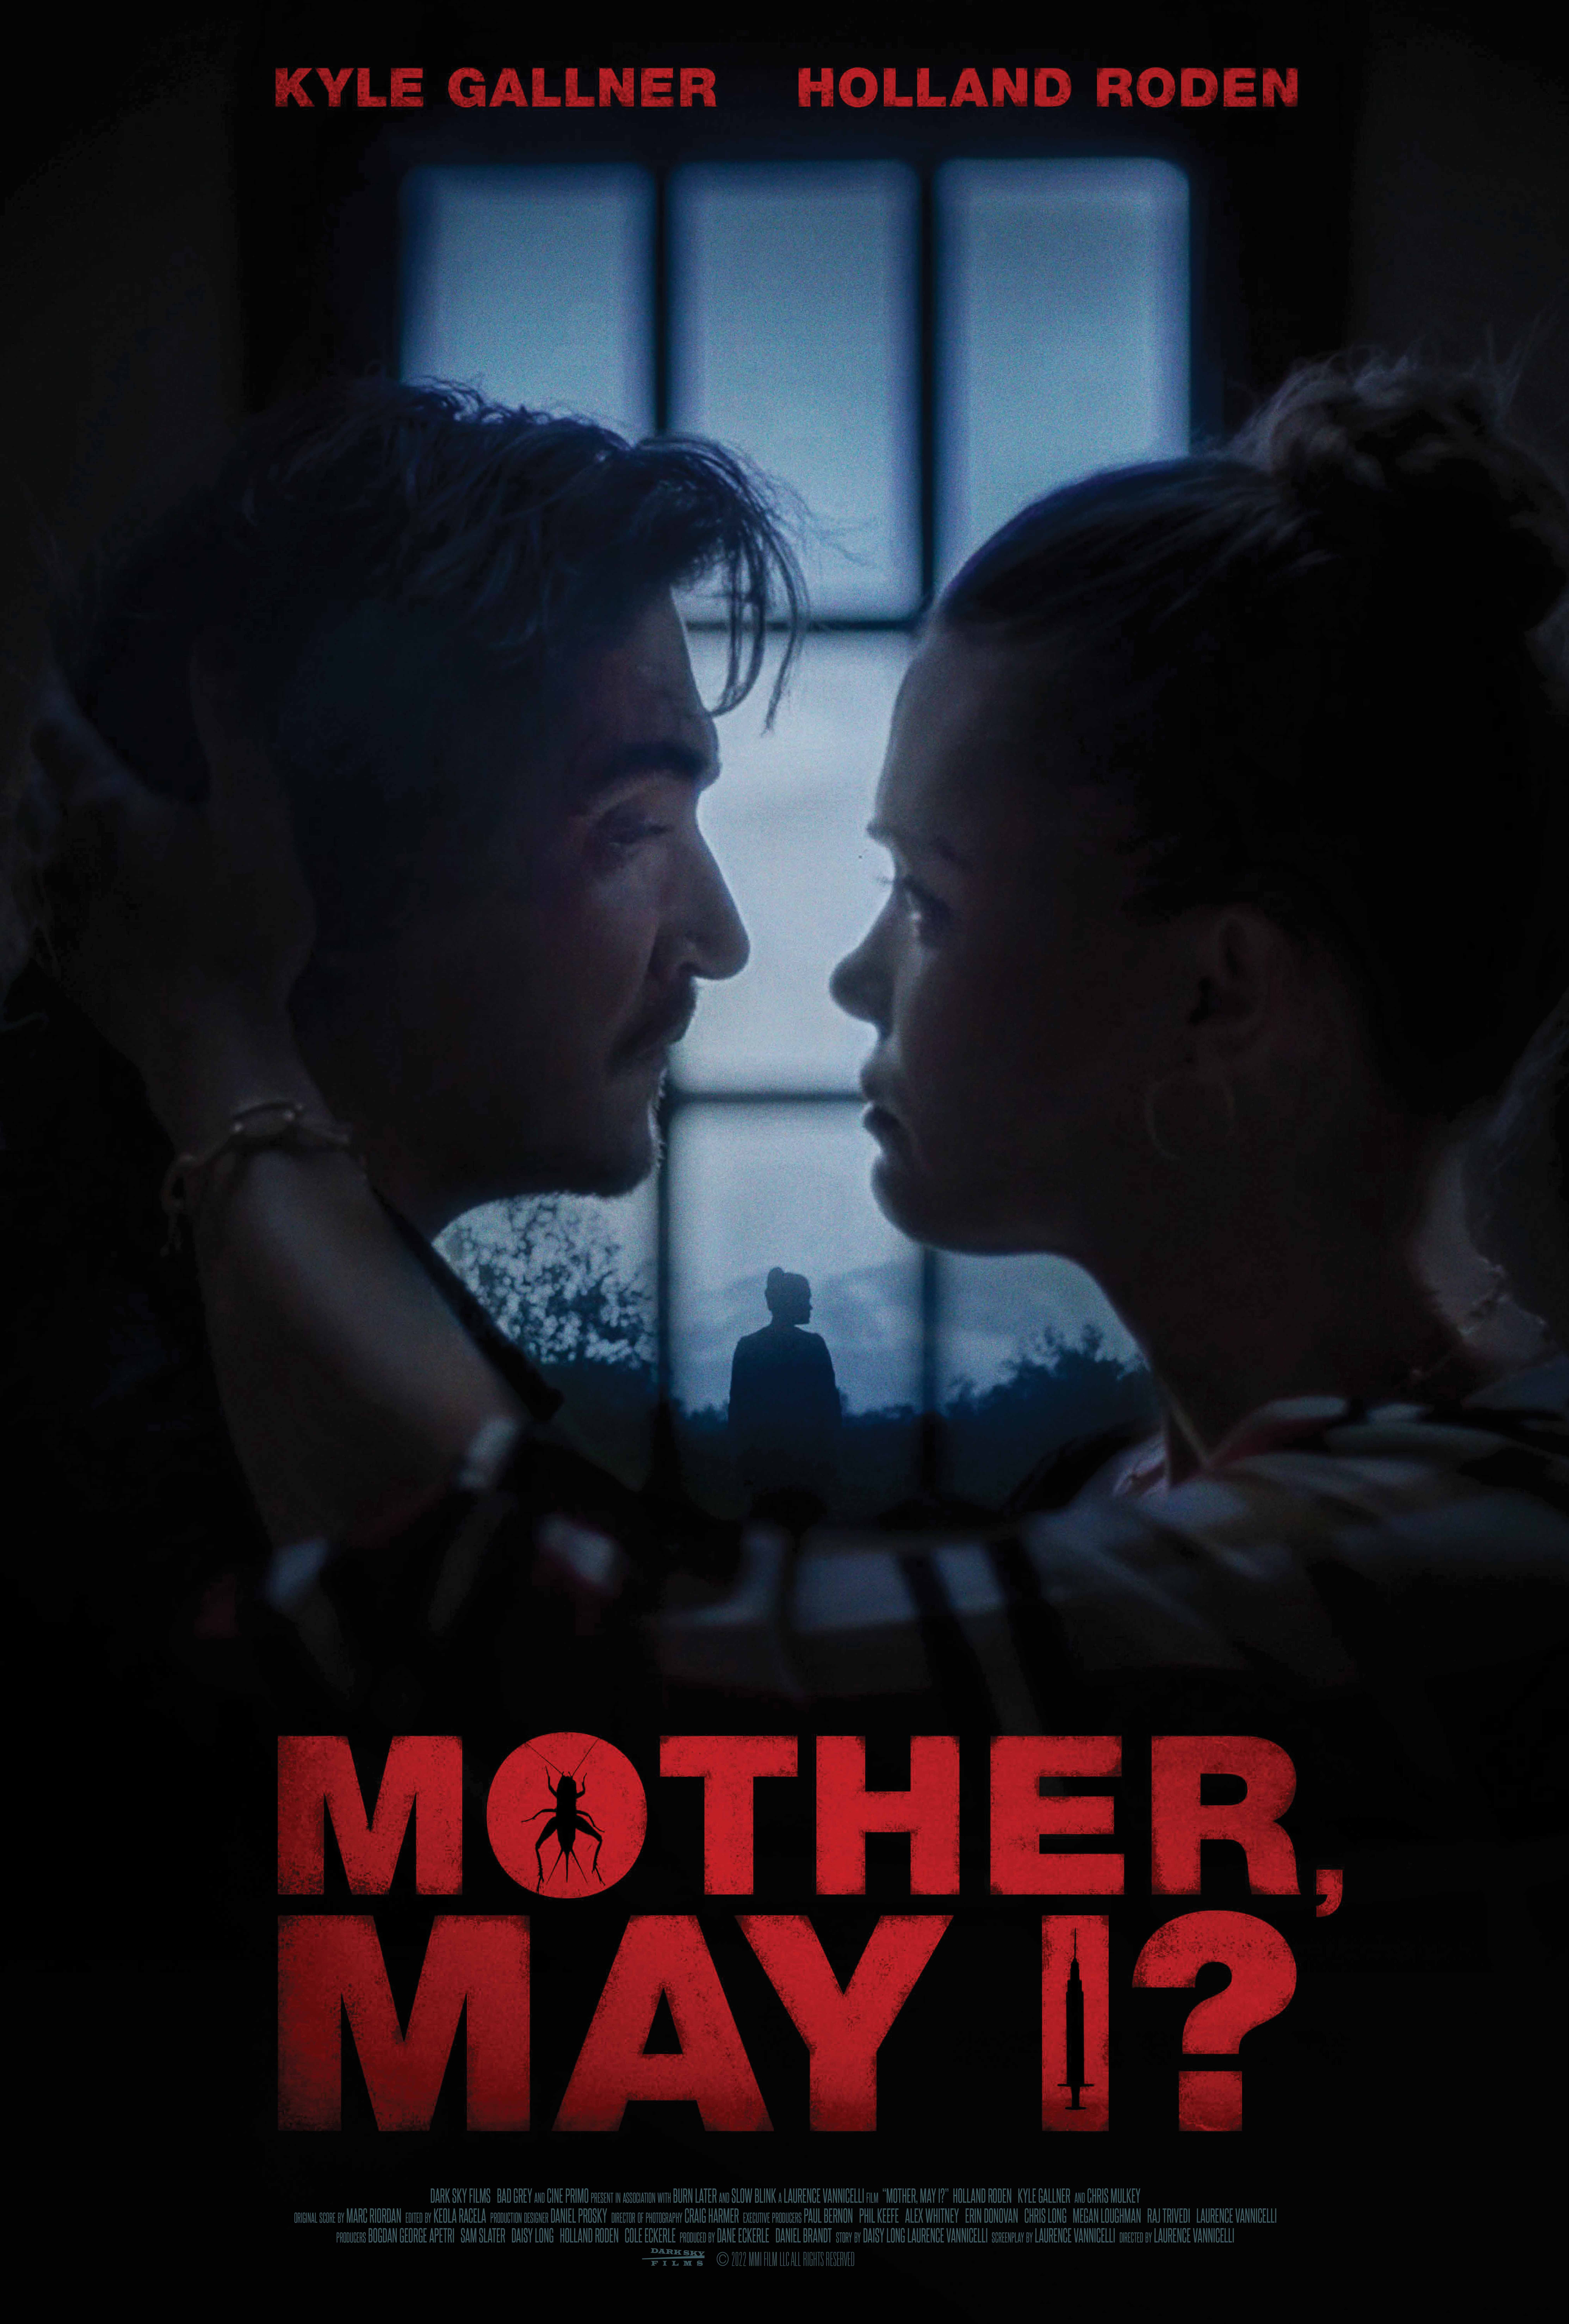 "Mother, May I?" - A Riveting Psychological Thriller Featuring Kyle Gallner and Holland Roden Set to Hit Theaters and VOD on July 21st 45